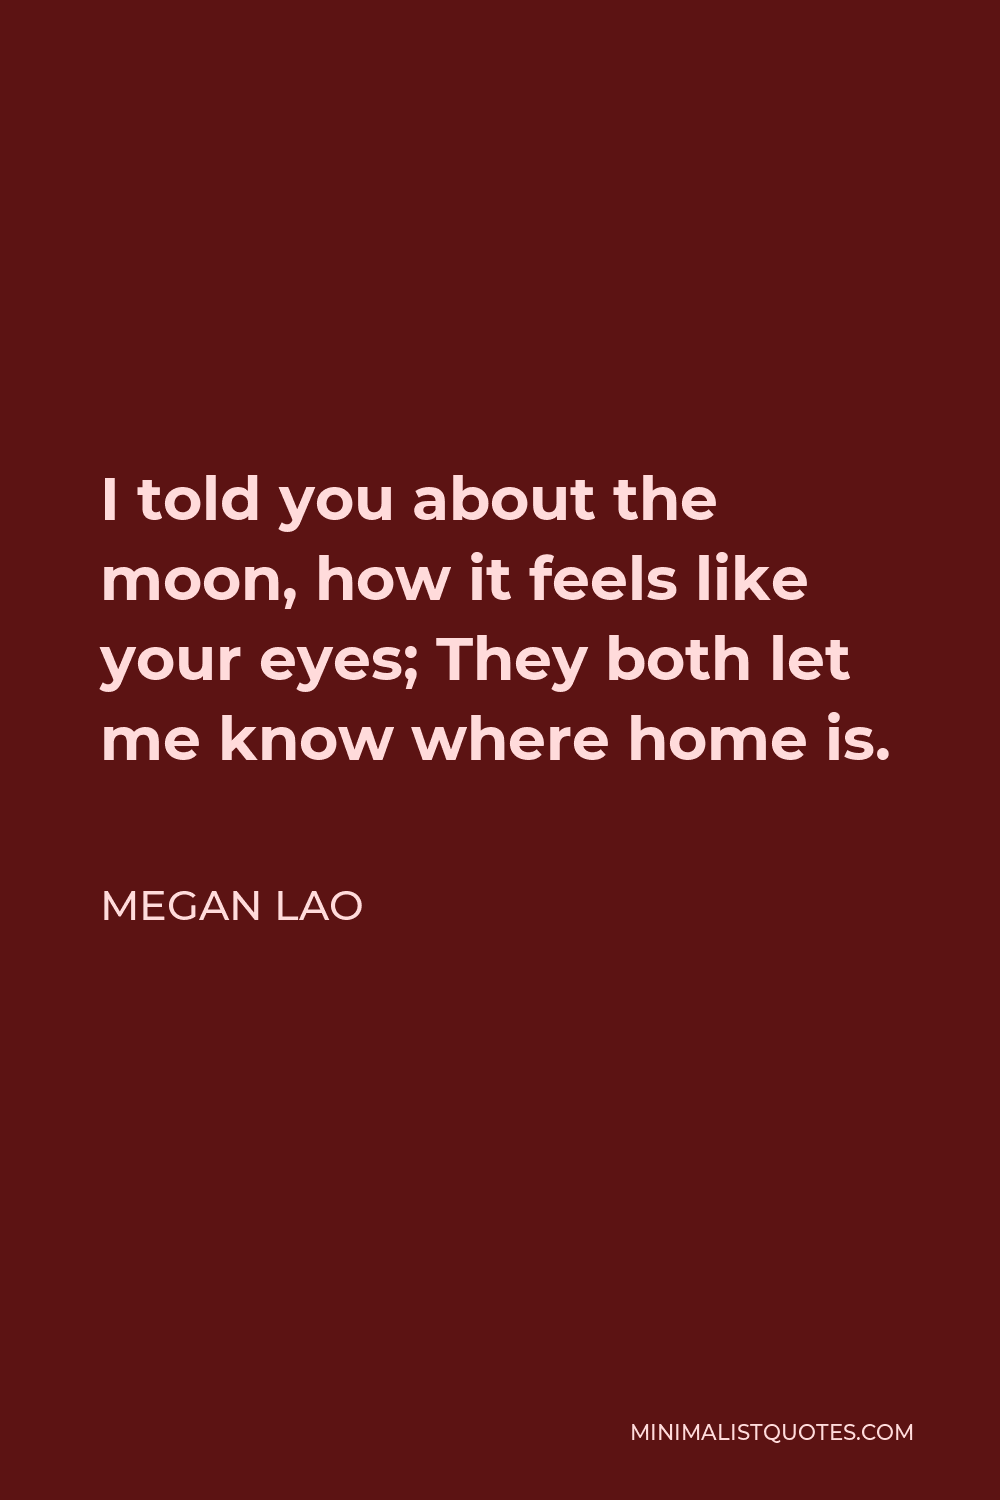 Megan Lao Quote - I told you about the moon, how it feels like your eyes; They both let me know where home is.